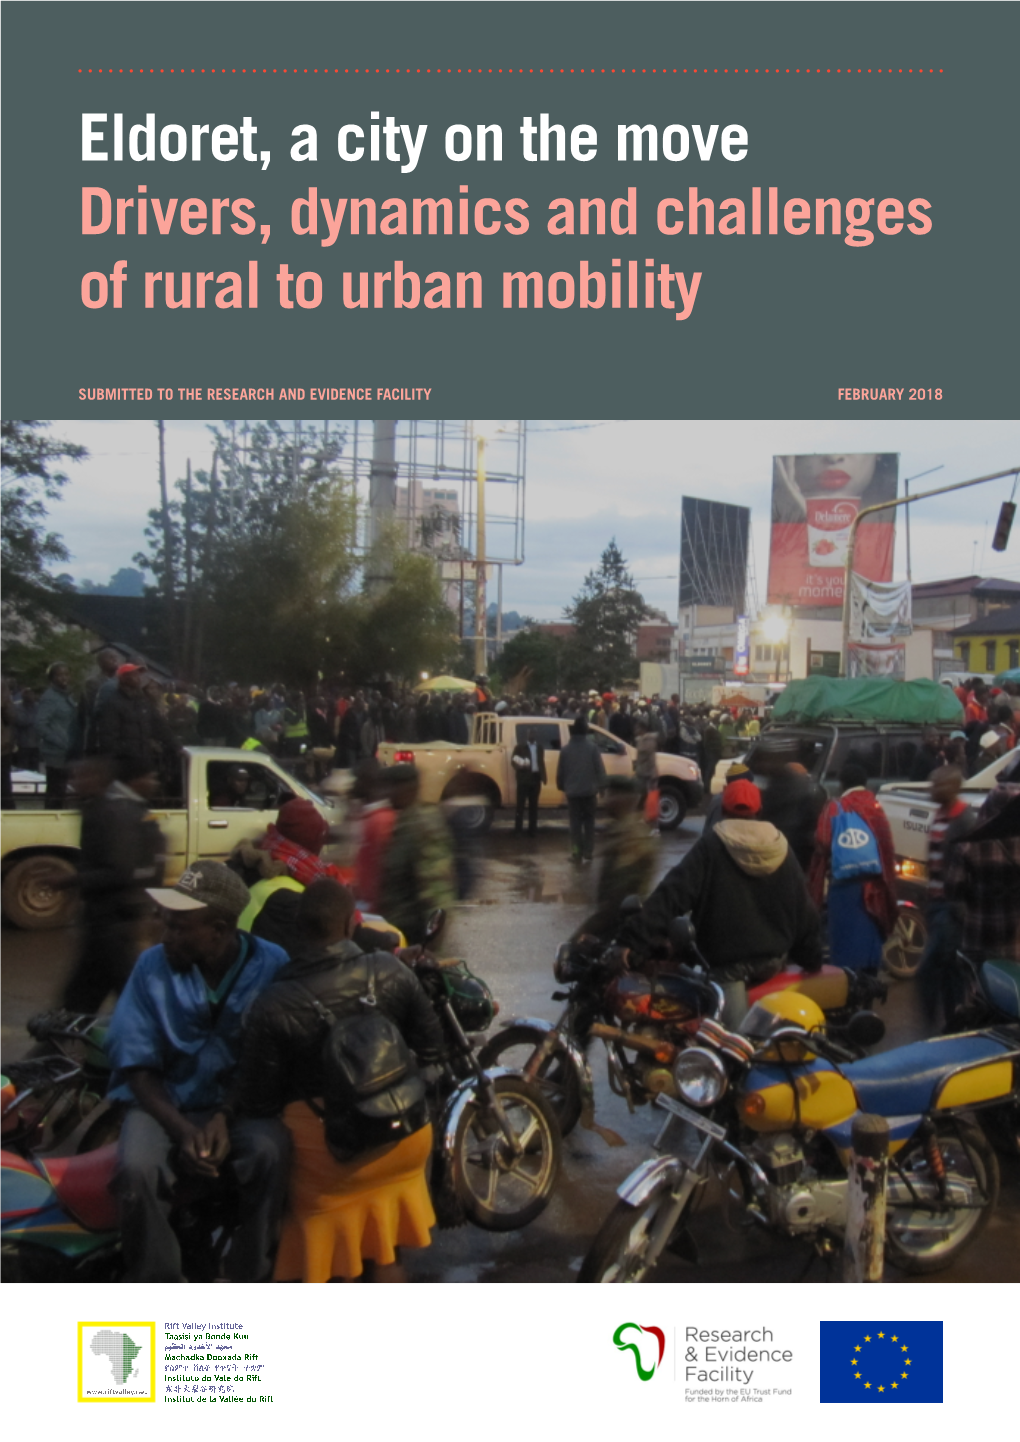 Eldoret, a City on the Move Drivers, Dynamics and Challenges of Rural to Urban Mobility